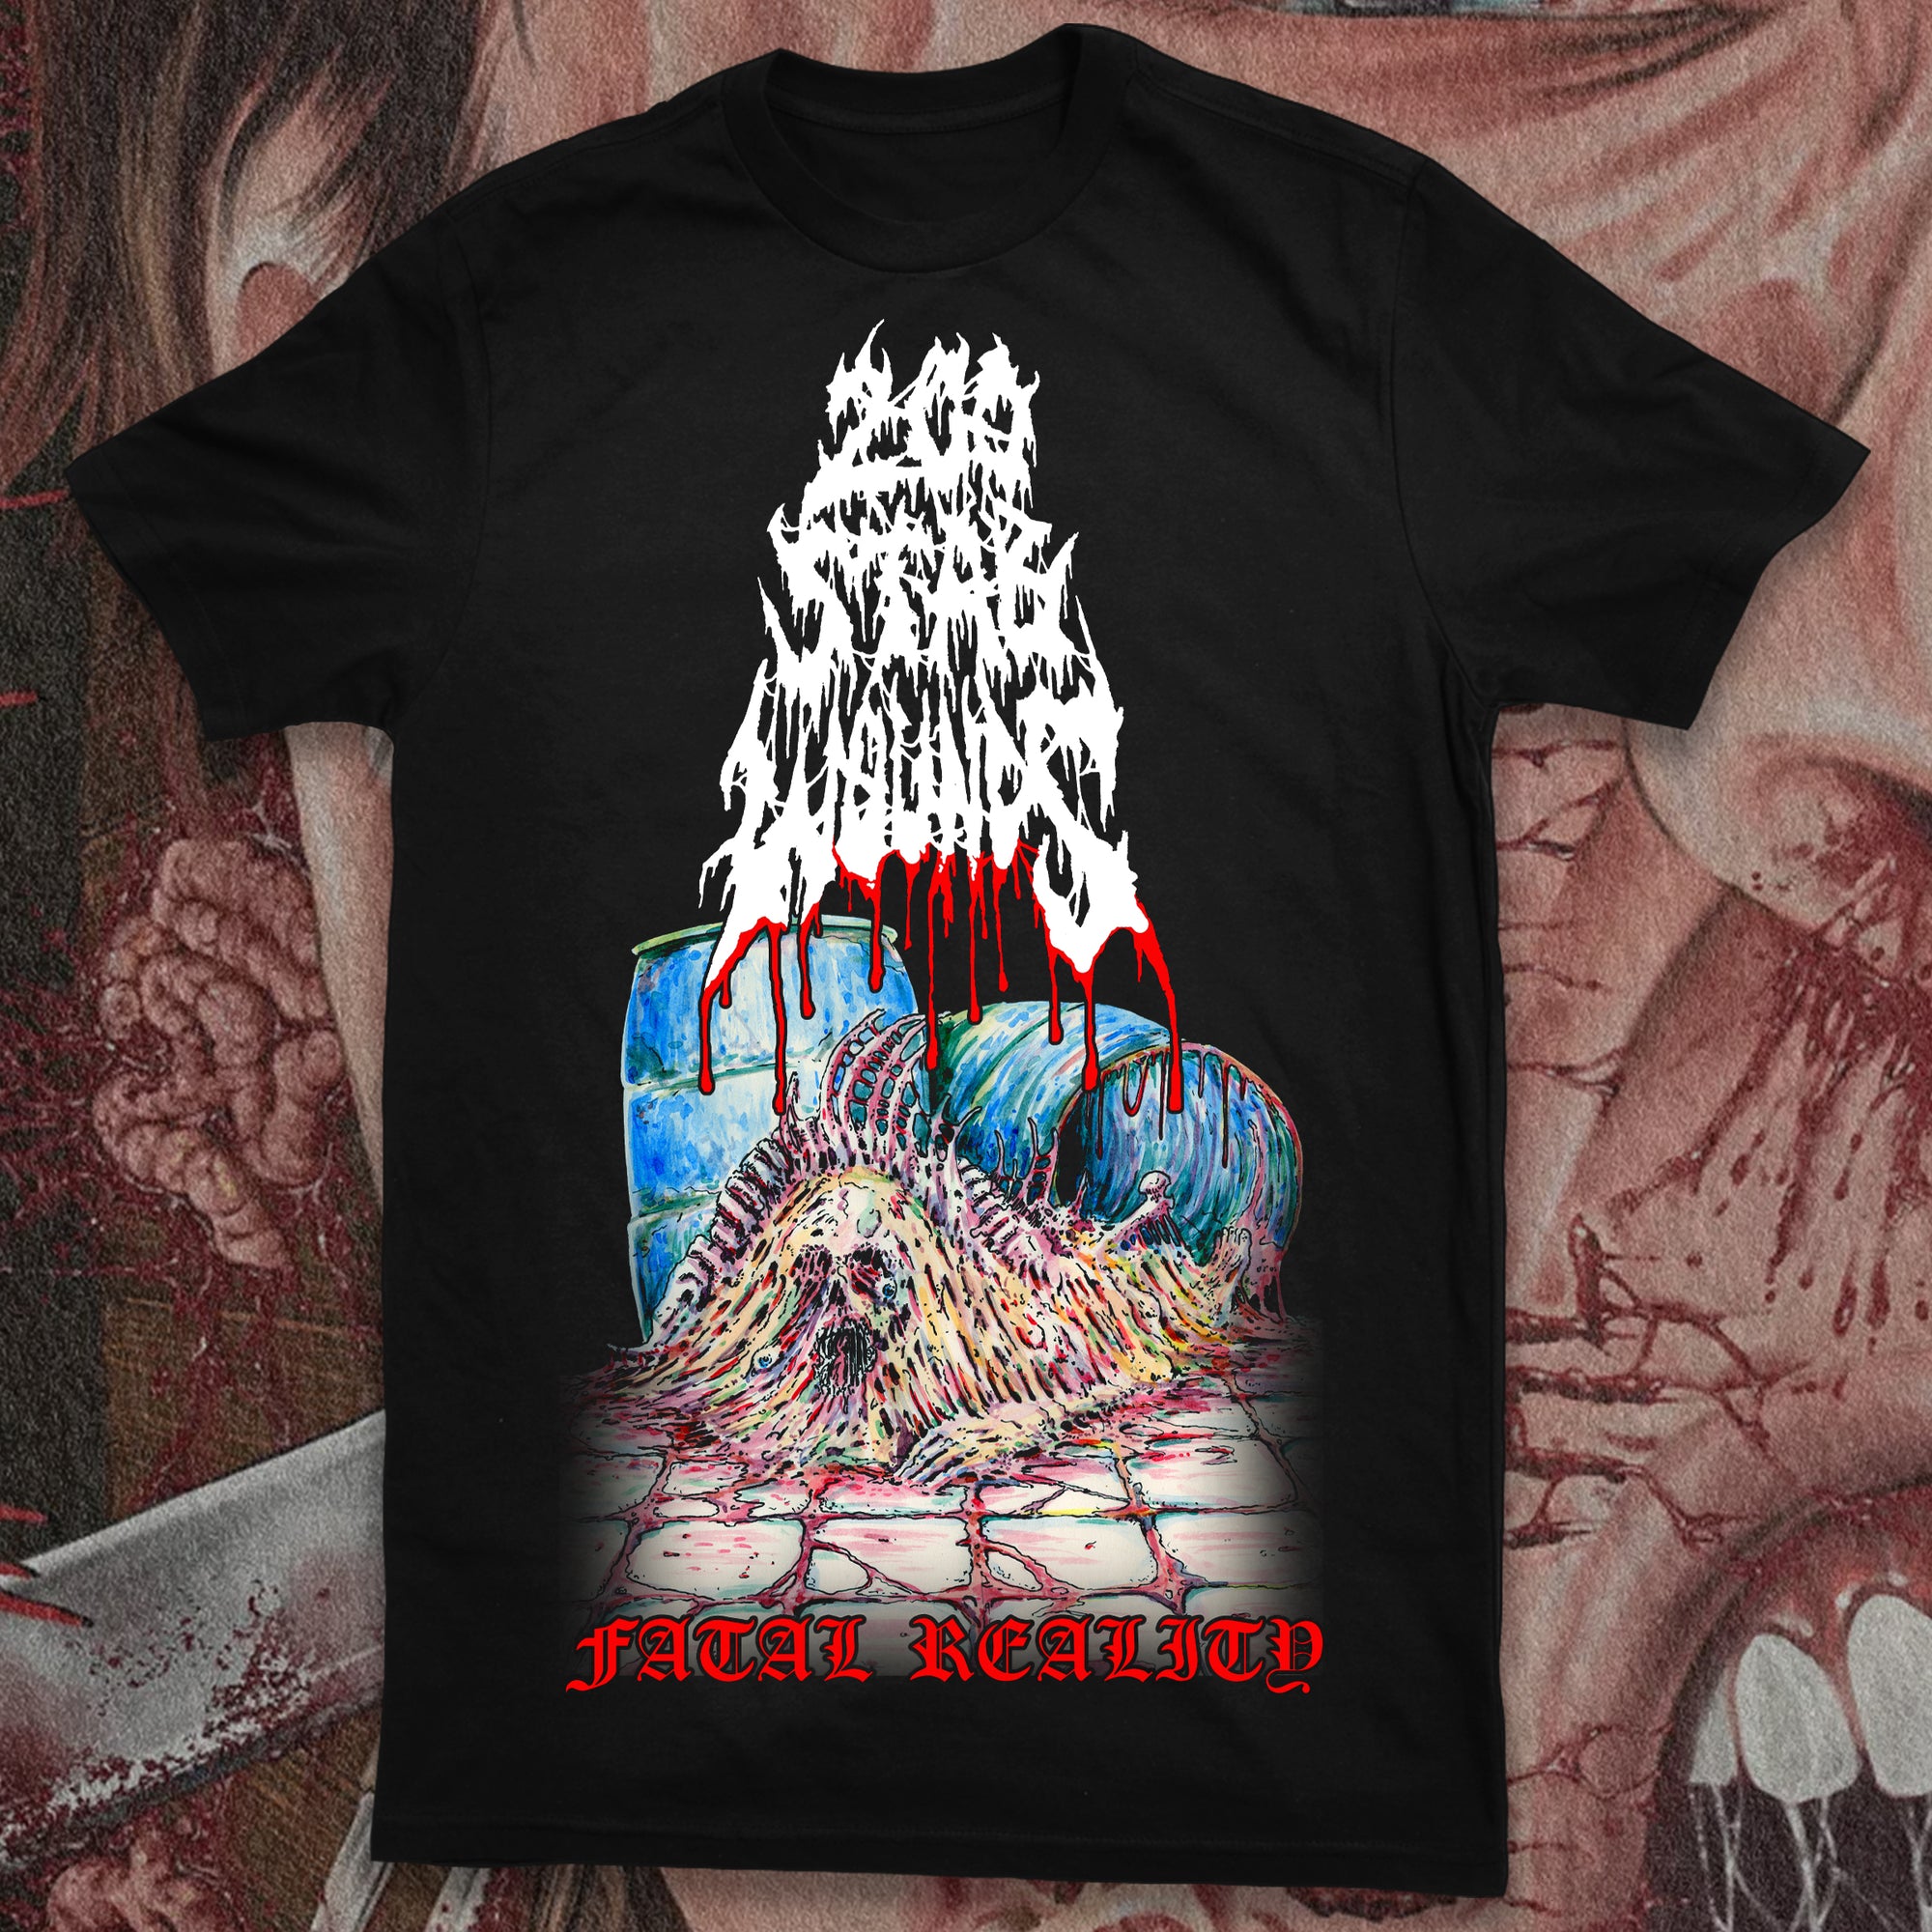 marionet Trots bezig 200 STAB WOUNDS "FATAL REALITY" SHIRT (PRE-ORDER)